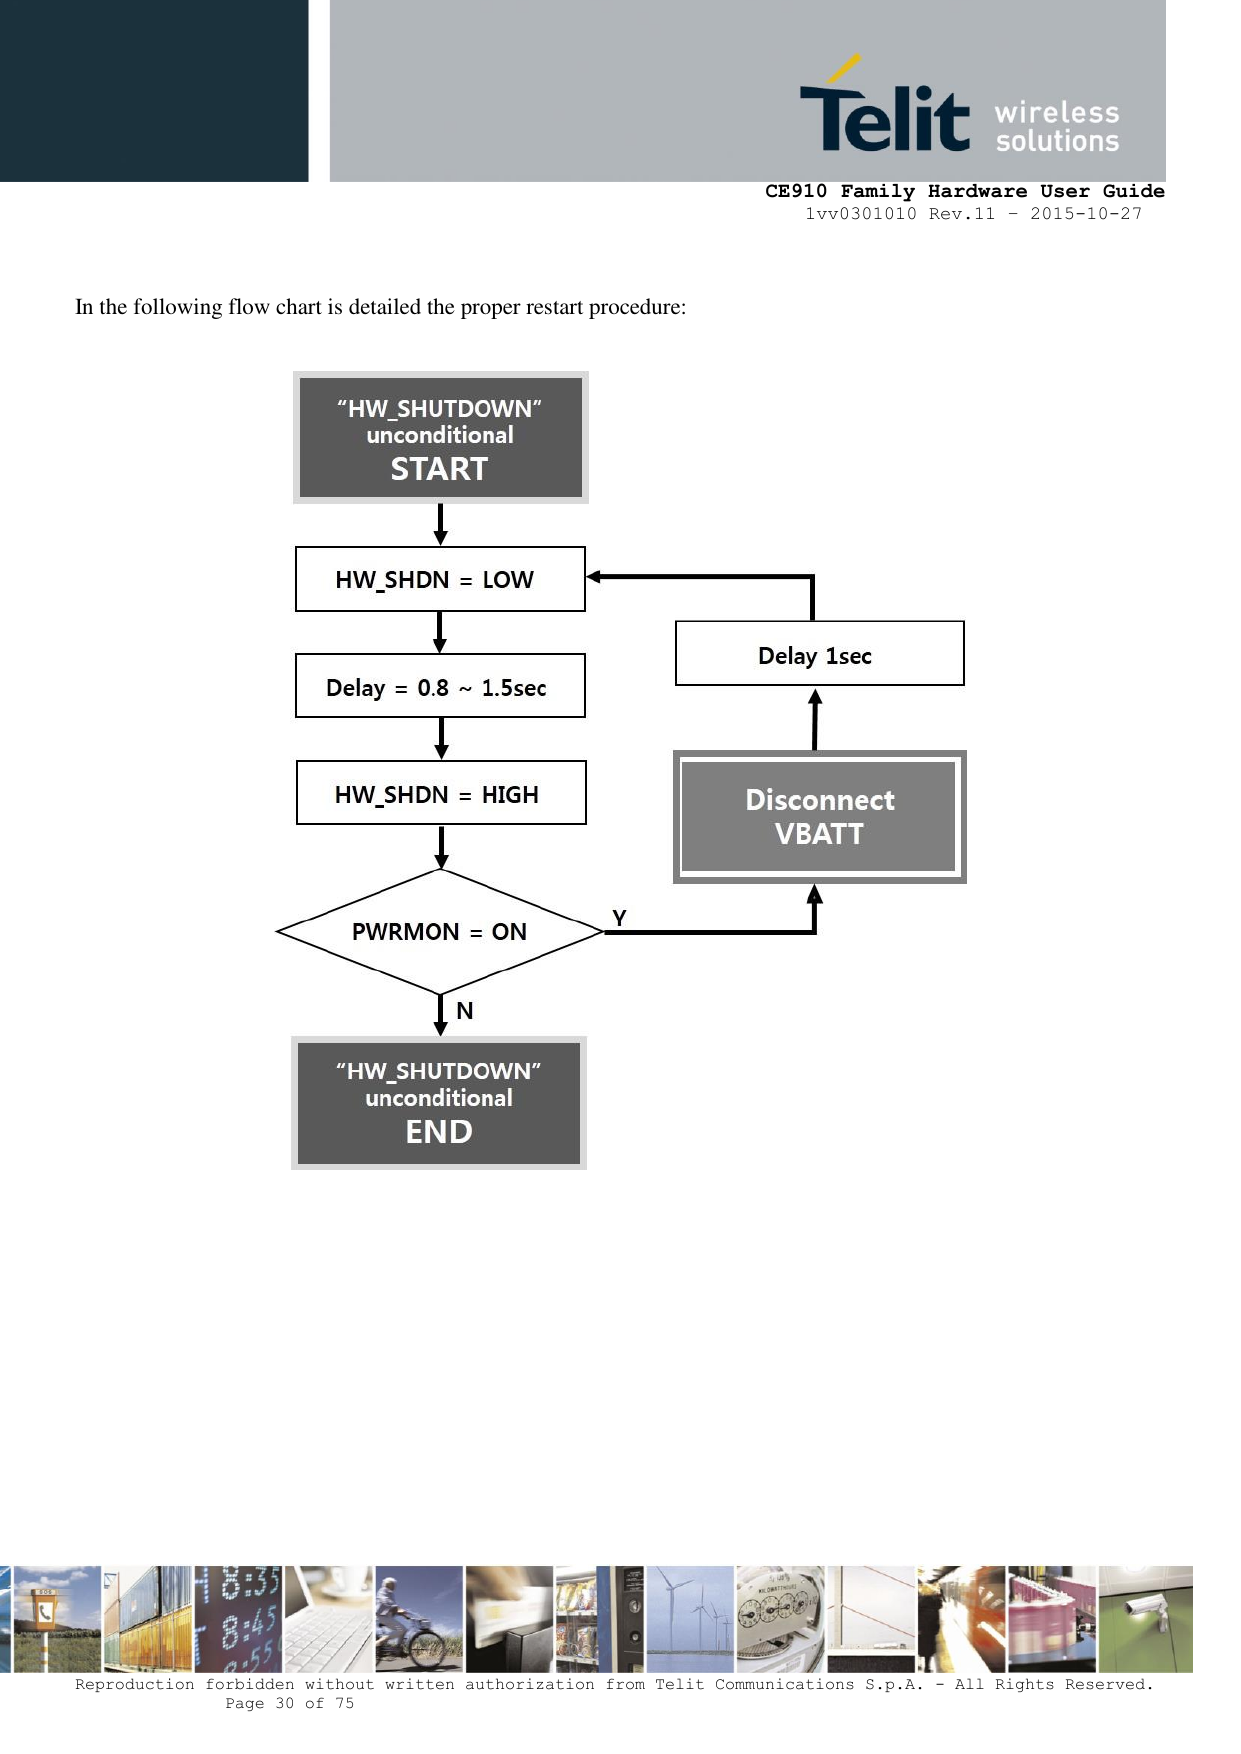     CE910 Family Hardware User Guide 1vv0301010 Rev.11 – 2015-10-27 Reproduction forbidden without written authorization from Telit Communications S.p.A. - All Rights Reserved.    Page 30 of 75                                                      In the following flow chart is detailed the proper restart procedure:      